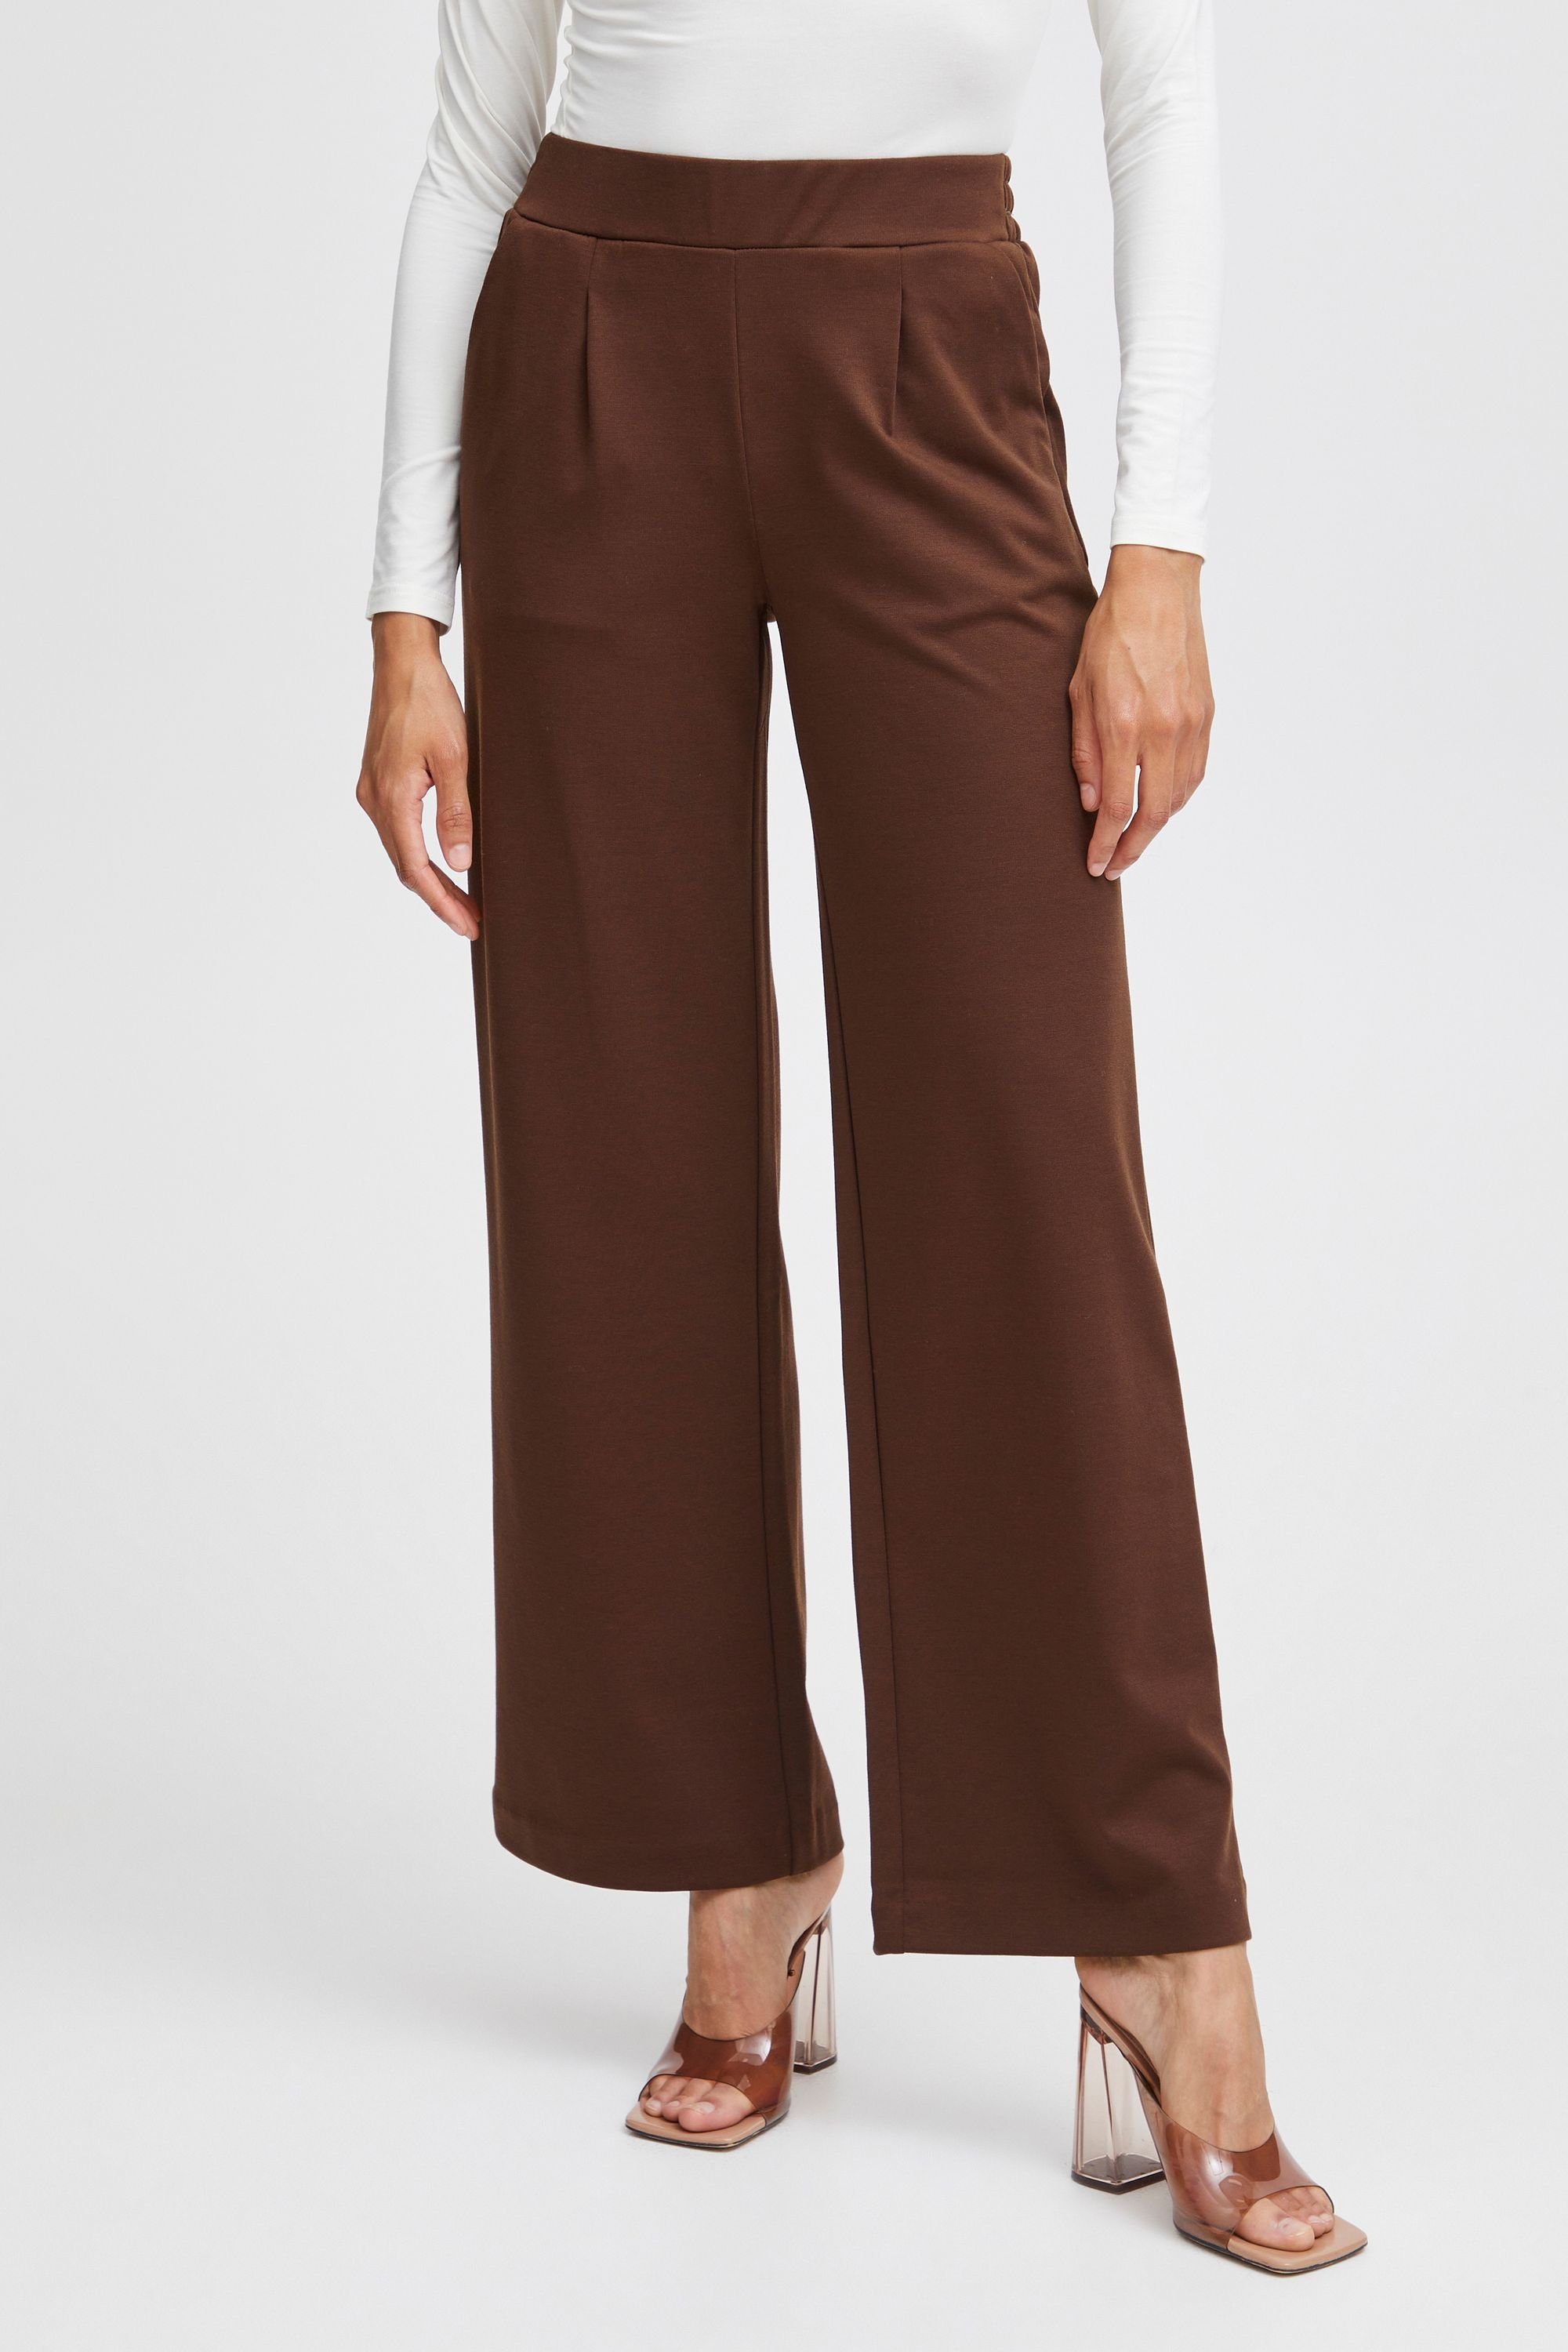 b.young Stoffhose BYRIZETTA - 2 20812847 Chicory (191419) Coffee WIDE PANTS 2